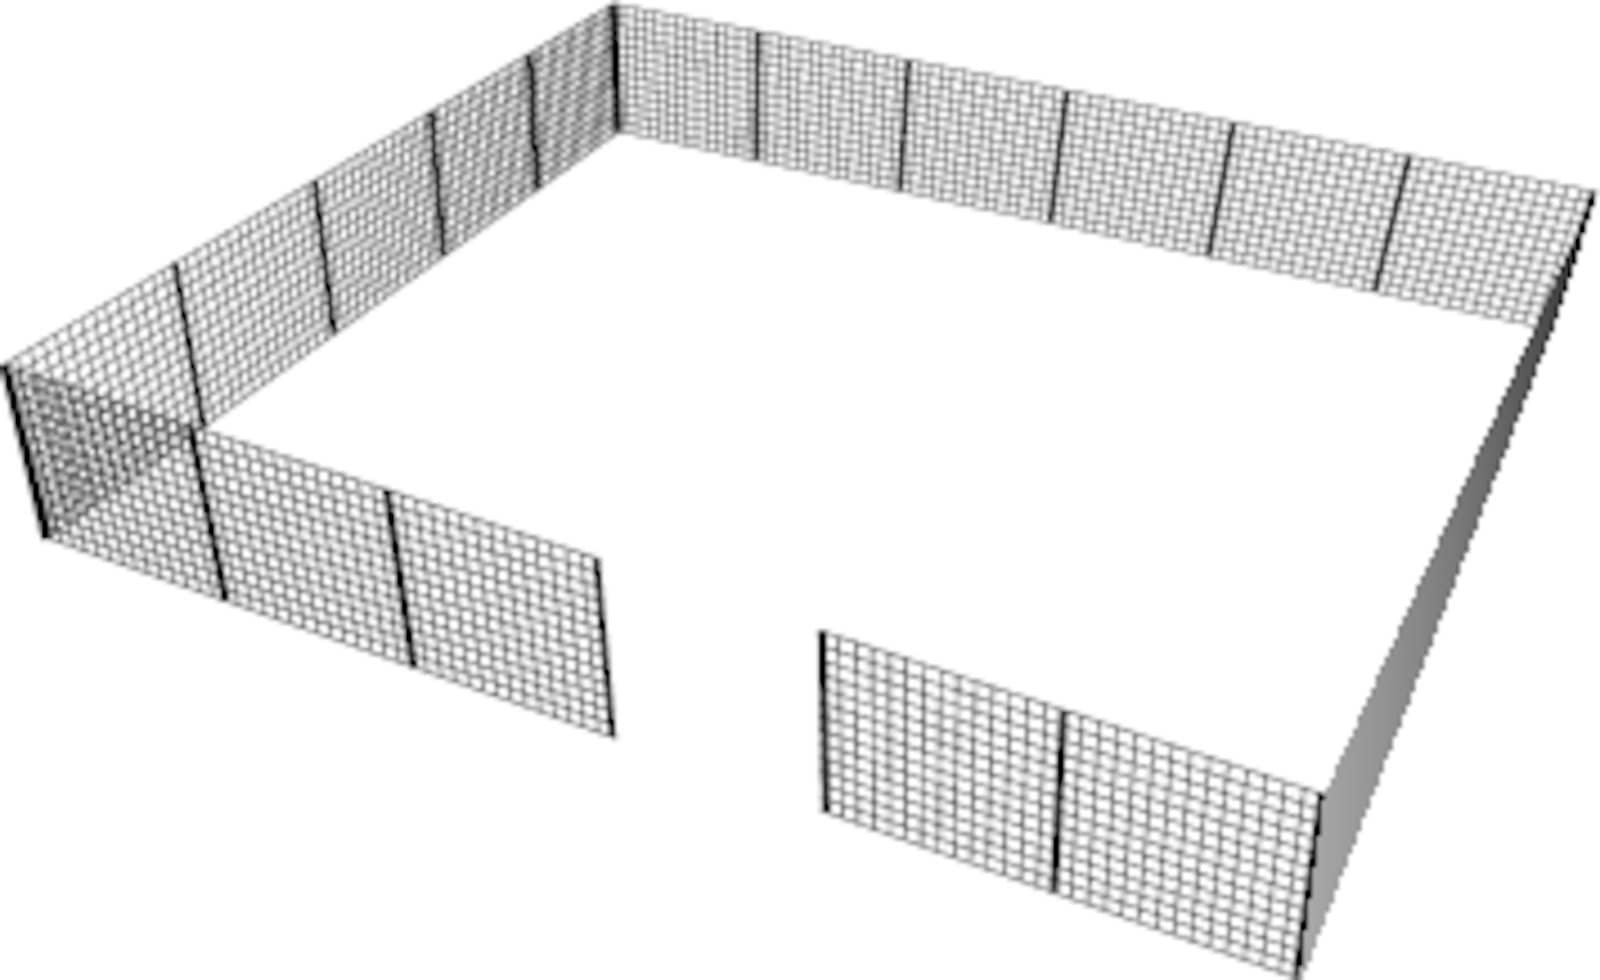 Open rectangular fence by VIPDesignUSA